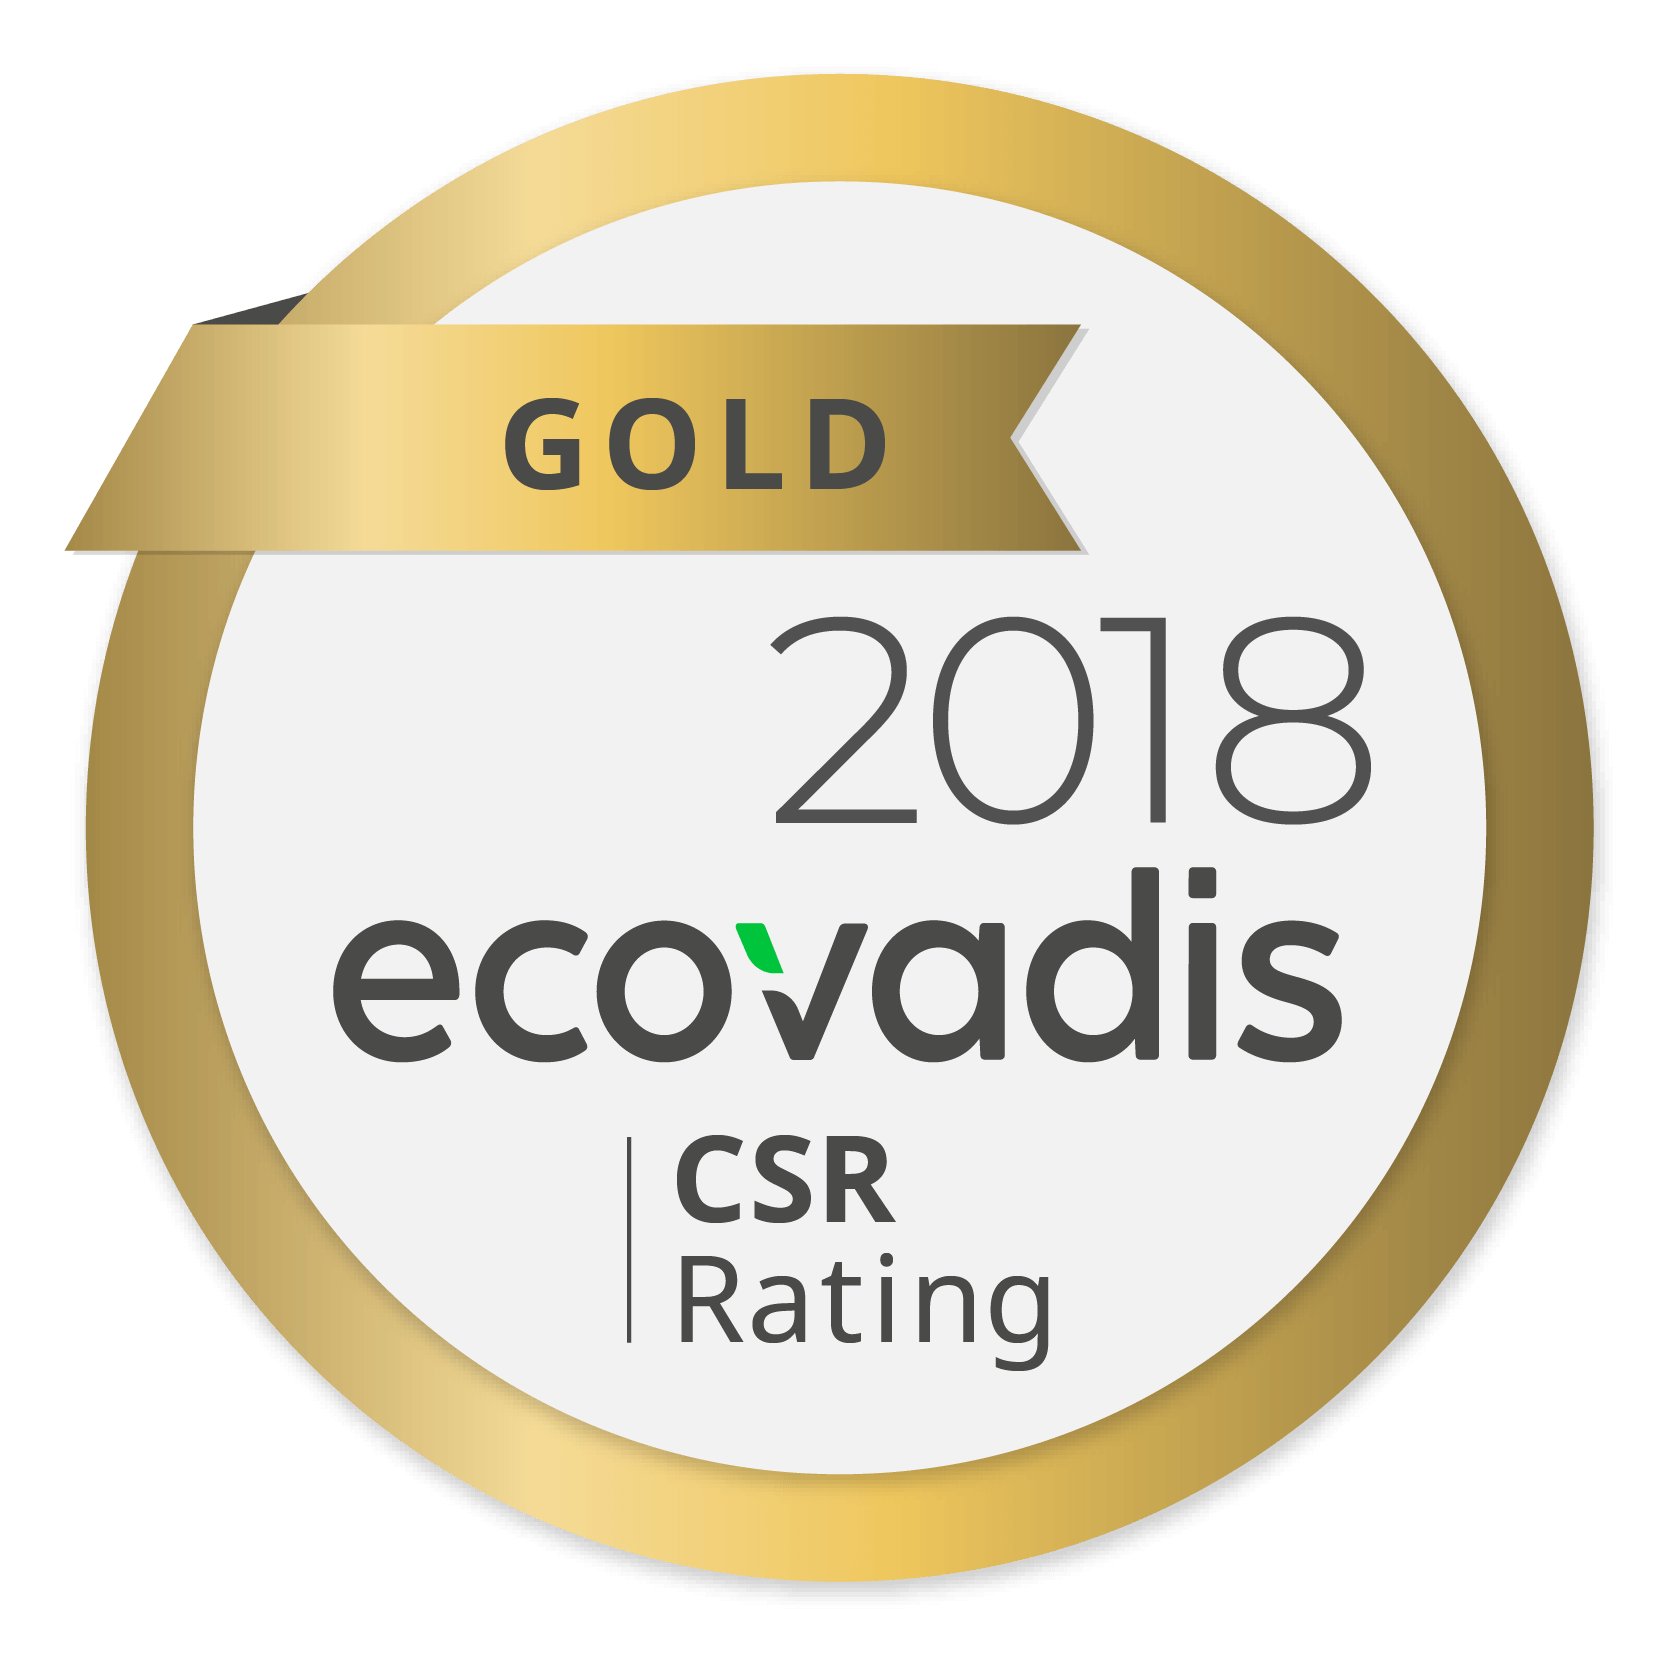 Ricoh awarded highest gold rating in EcoVadis global supplier survey for fourth year running